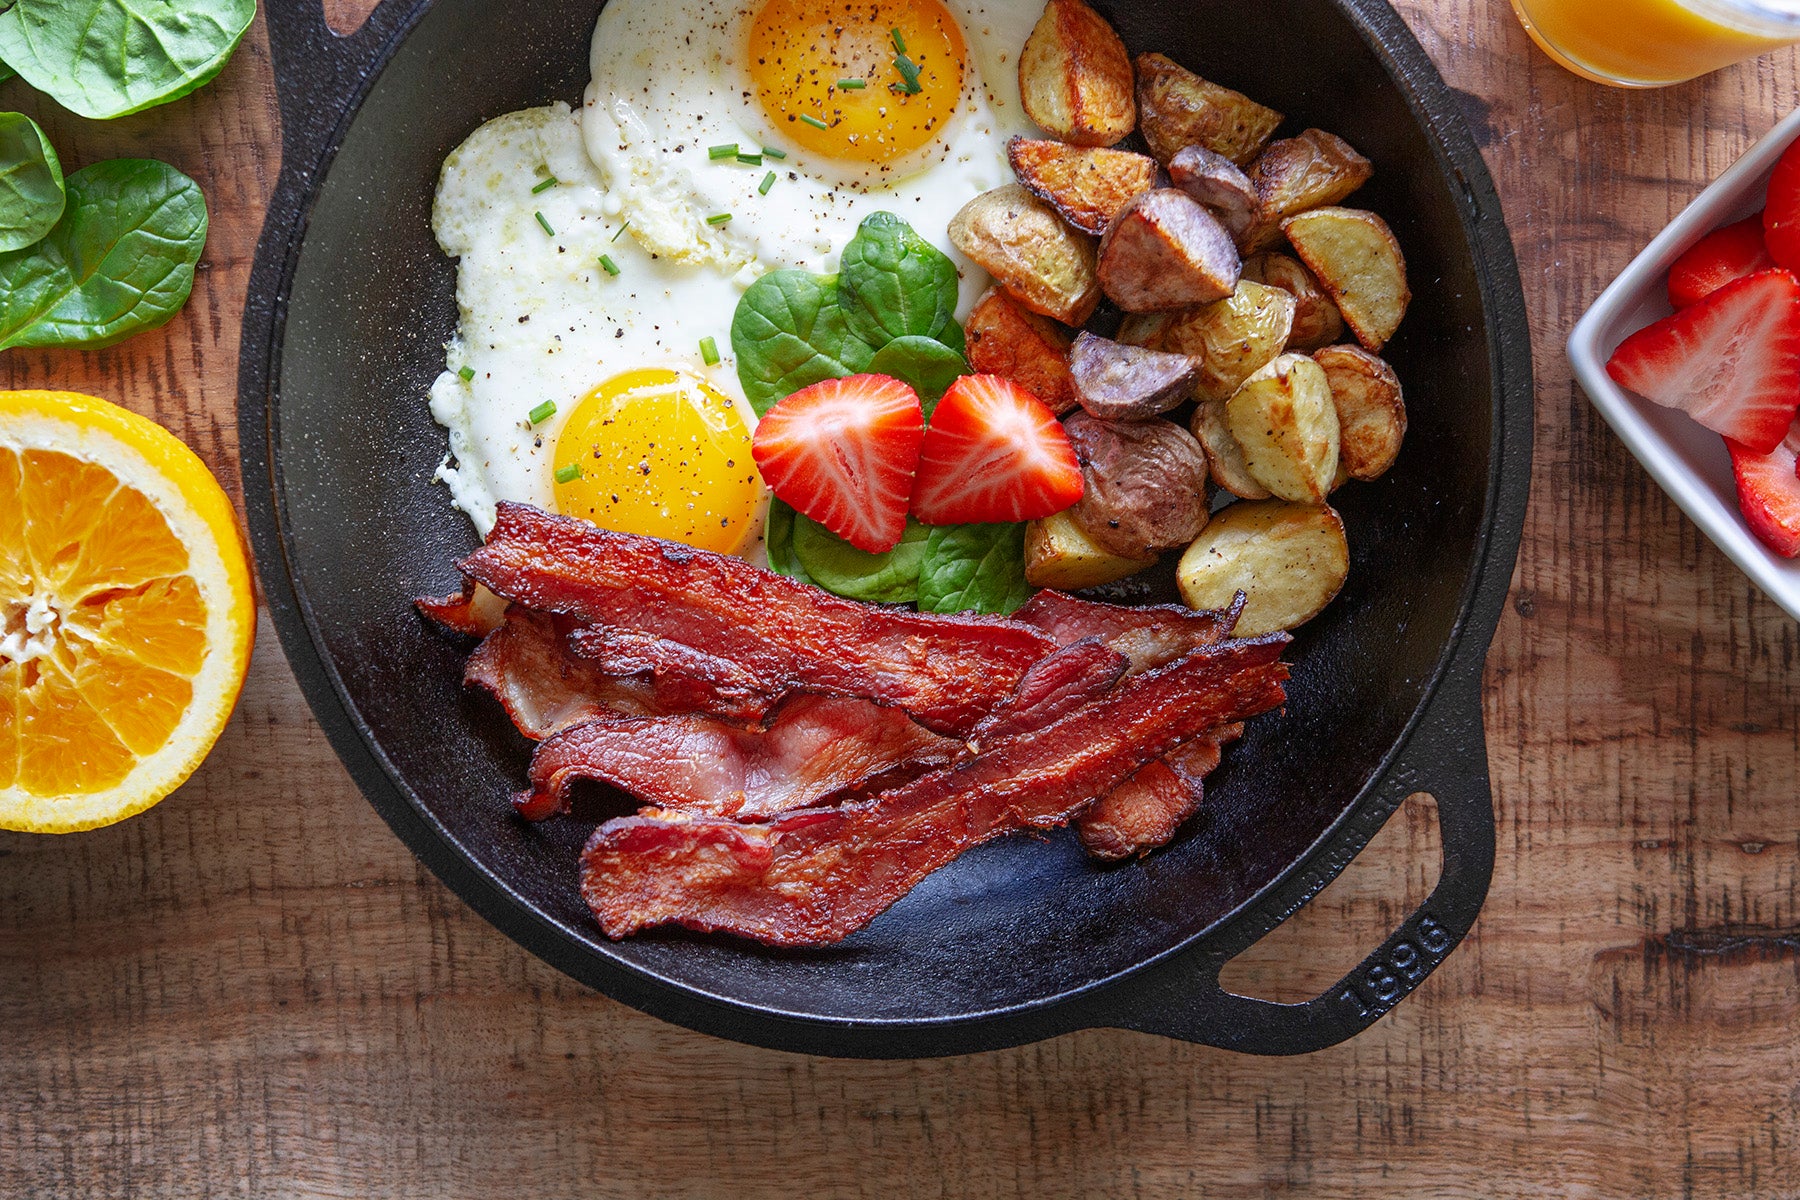 Several slices of cooked Pederson's Farms Applewood Smoked Bacon are shown in a cast iron skillet. Beside the bacon are golden breakfast potatoes, two eggs, fresh spinach, and halved strawberries.